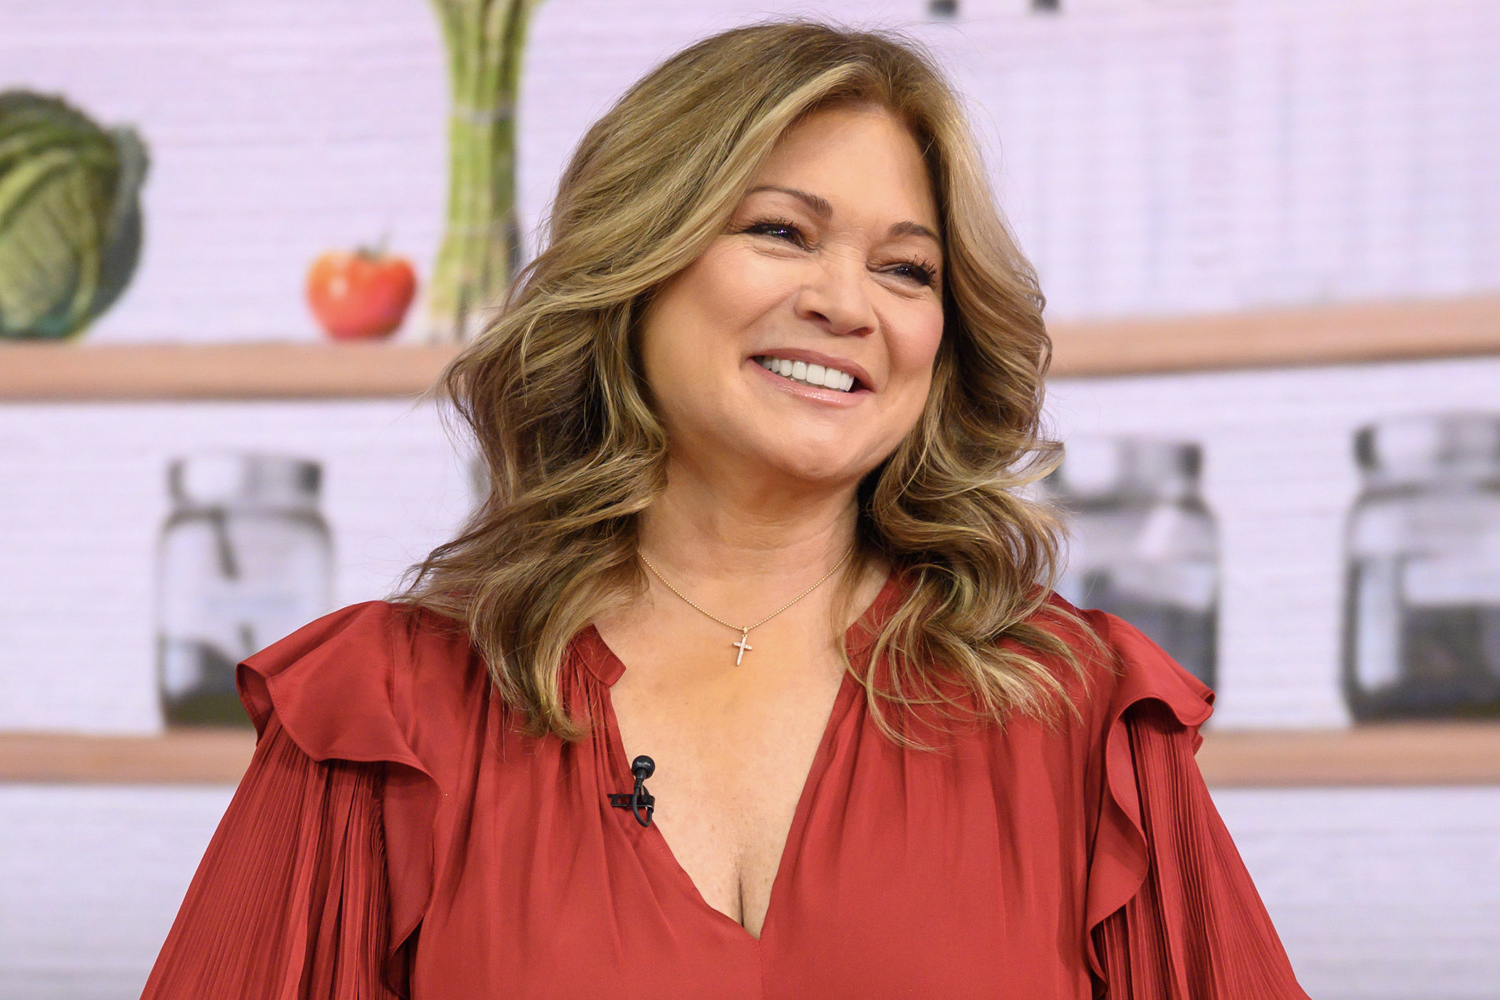 Valerie Bertinelli smiling during an appearance on 'Today'